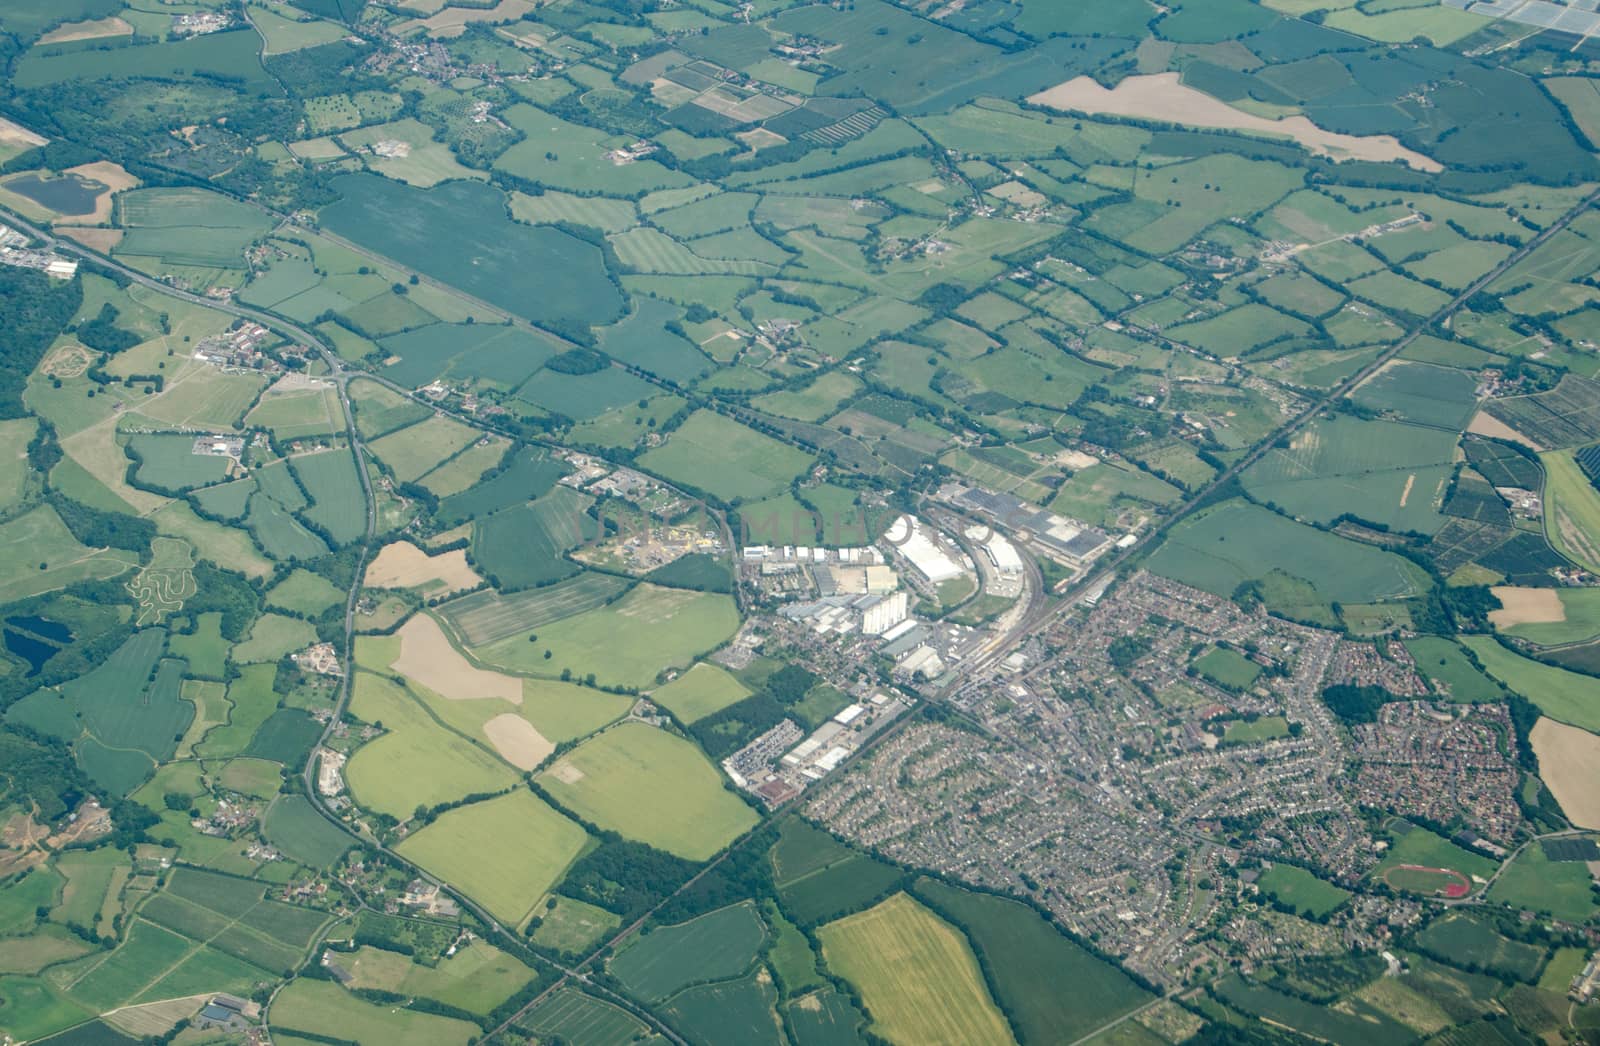 Paddock Wood, Kent - Aerial View by BasPhoto